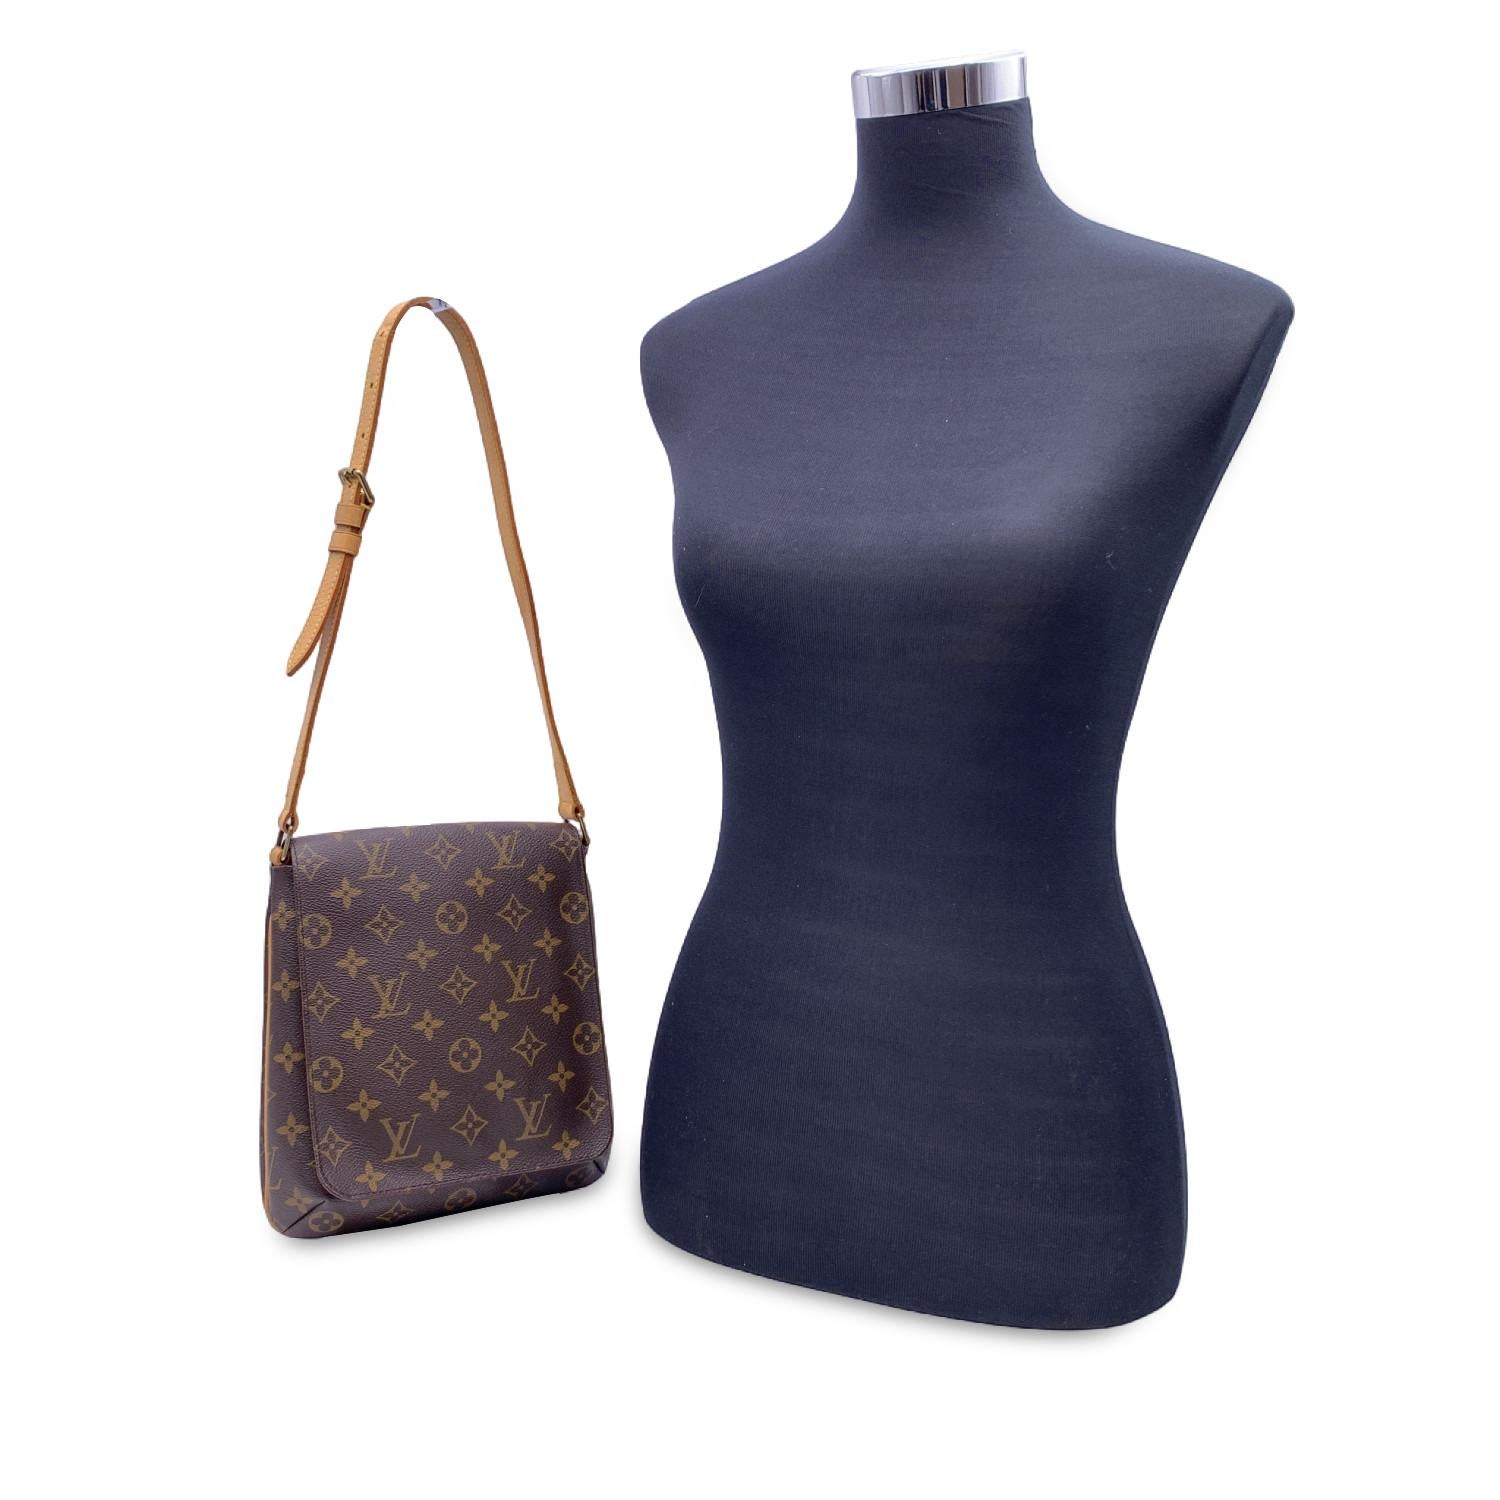 Louis Vuitton 'Musette Salsa'Shoulder Bag, crafted in timeless LV monogram canvas, the bag has golden brass hardware. The exterior features a flap with magnetic button closure. Its interior is lined with soft lining and features 1 open pocket